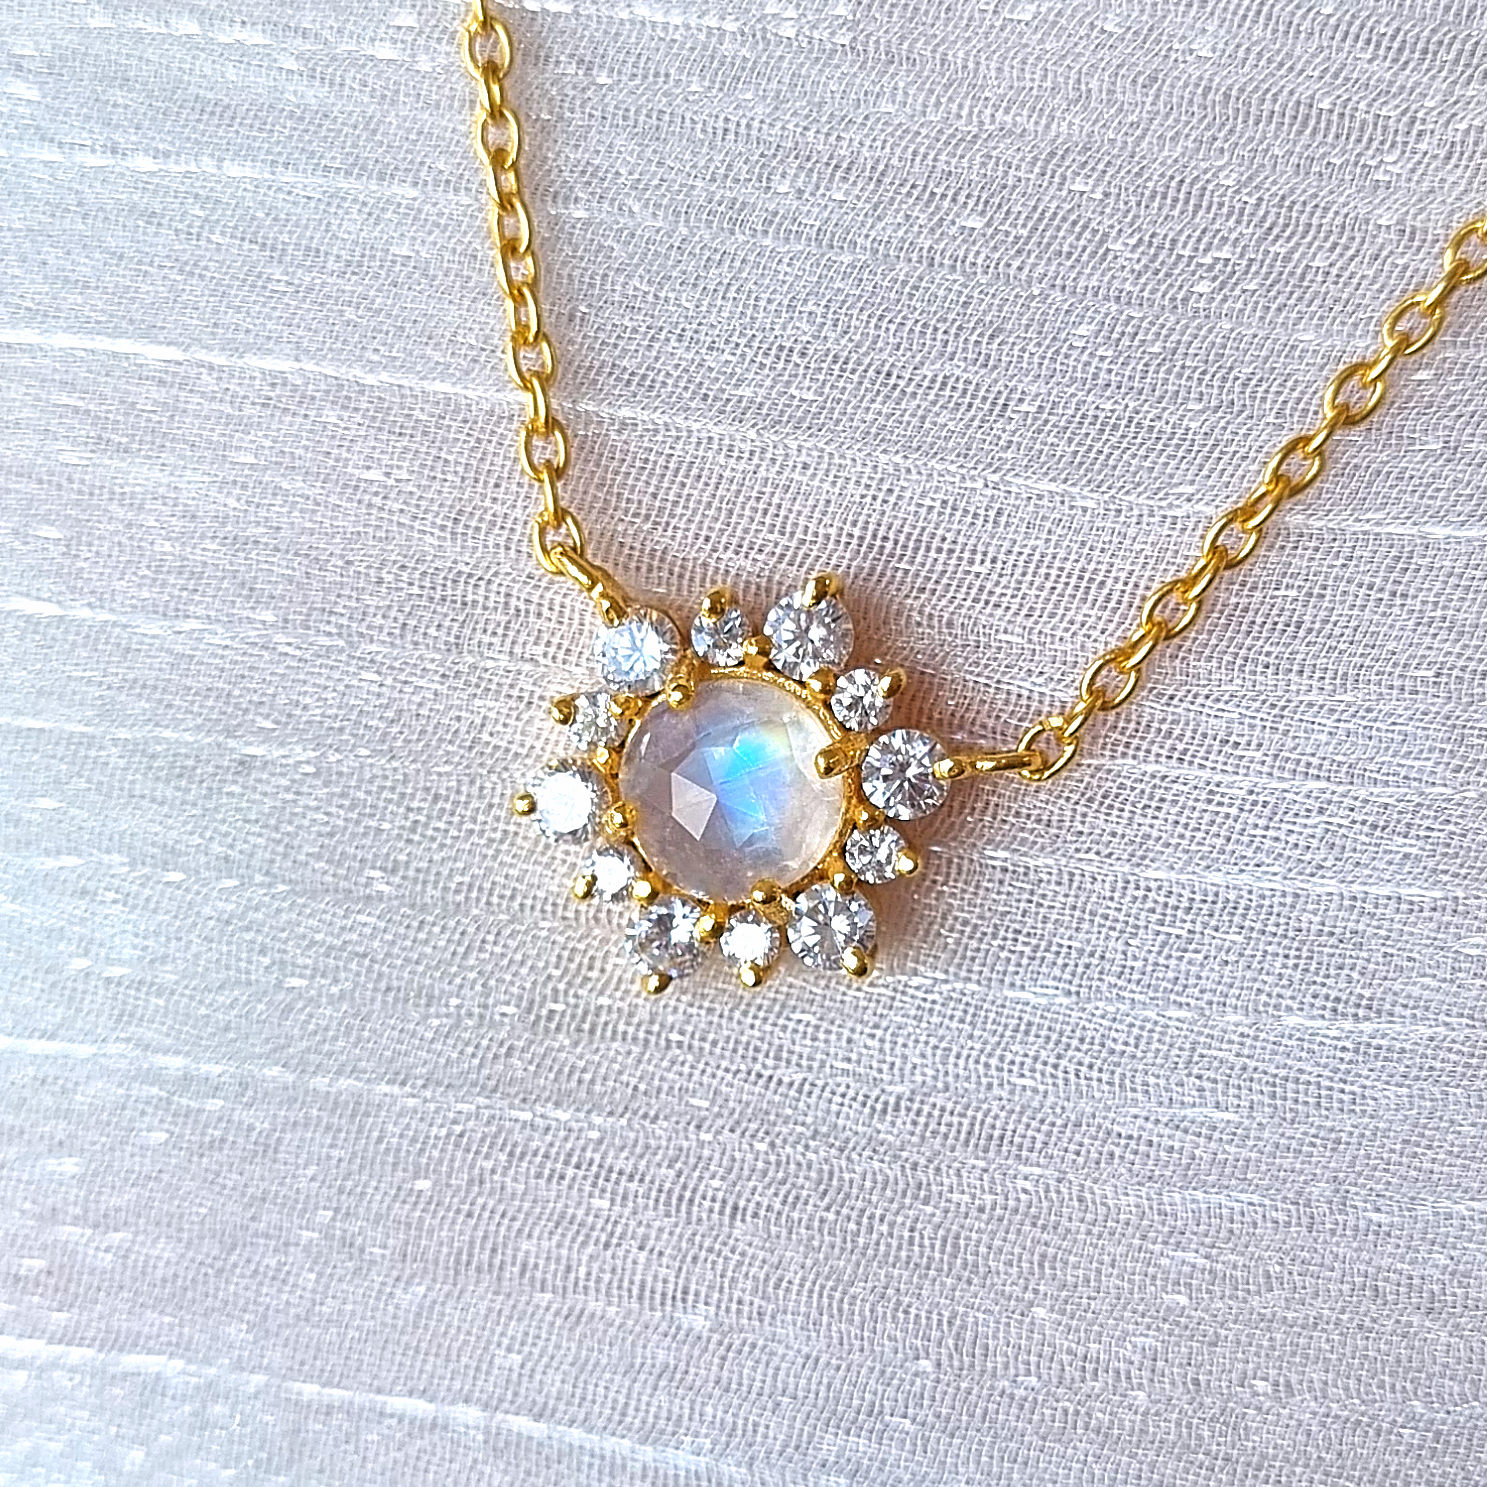 round cut moonstone and diamond necklace in 18k gold vermeil, present for promise, anniversary, birthday, mother's day...